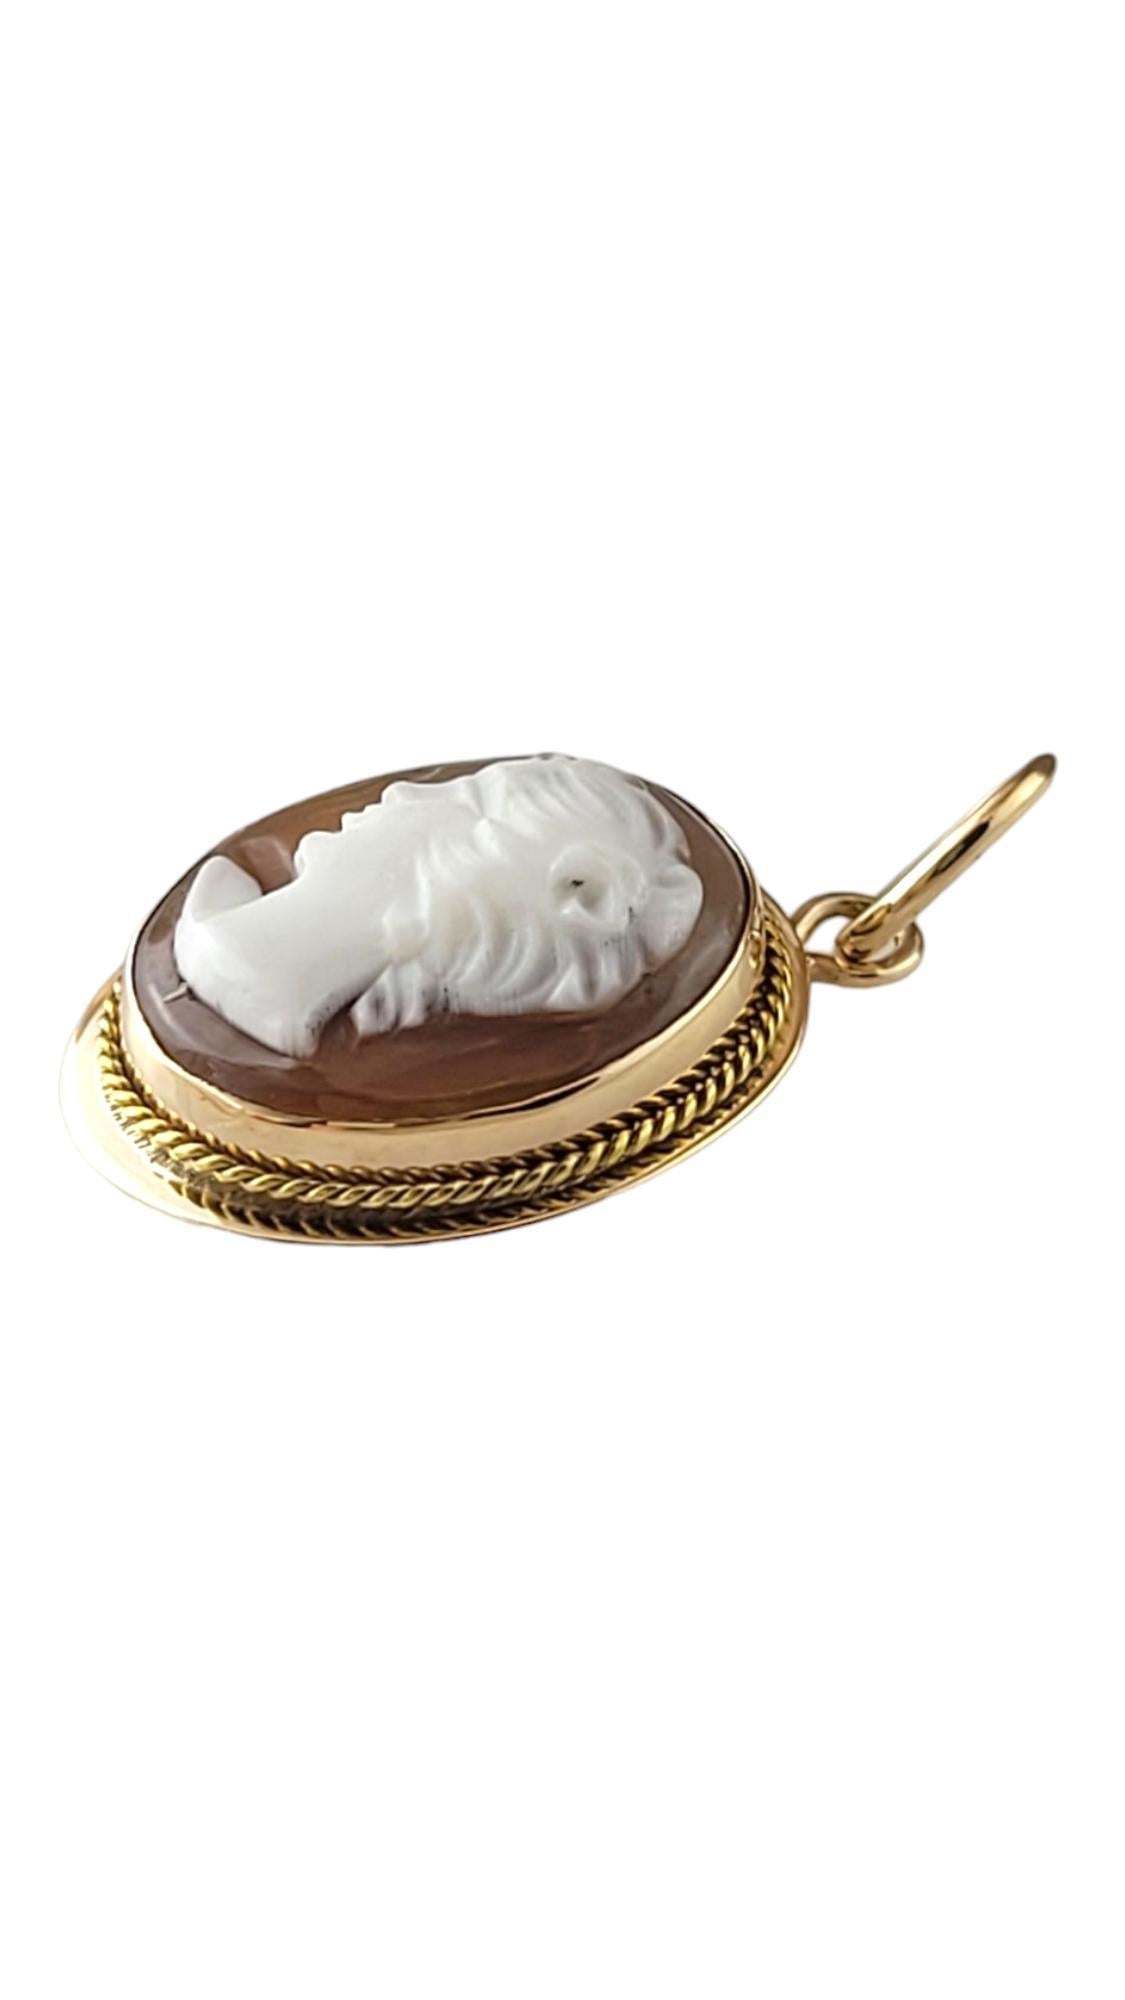 14K Yellow Gold Cameo Pendant #16882

This beautiful cameo pendant is crafted from 14K yellow gold and is going to look gorgeous on anybody!

Size: 17.2mm X 12.7mm X 4.8mm

Weight: 0.8 dwt/ 1.3 g

Hallmark: 585 .3NA

Very good condition,